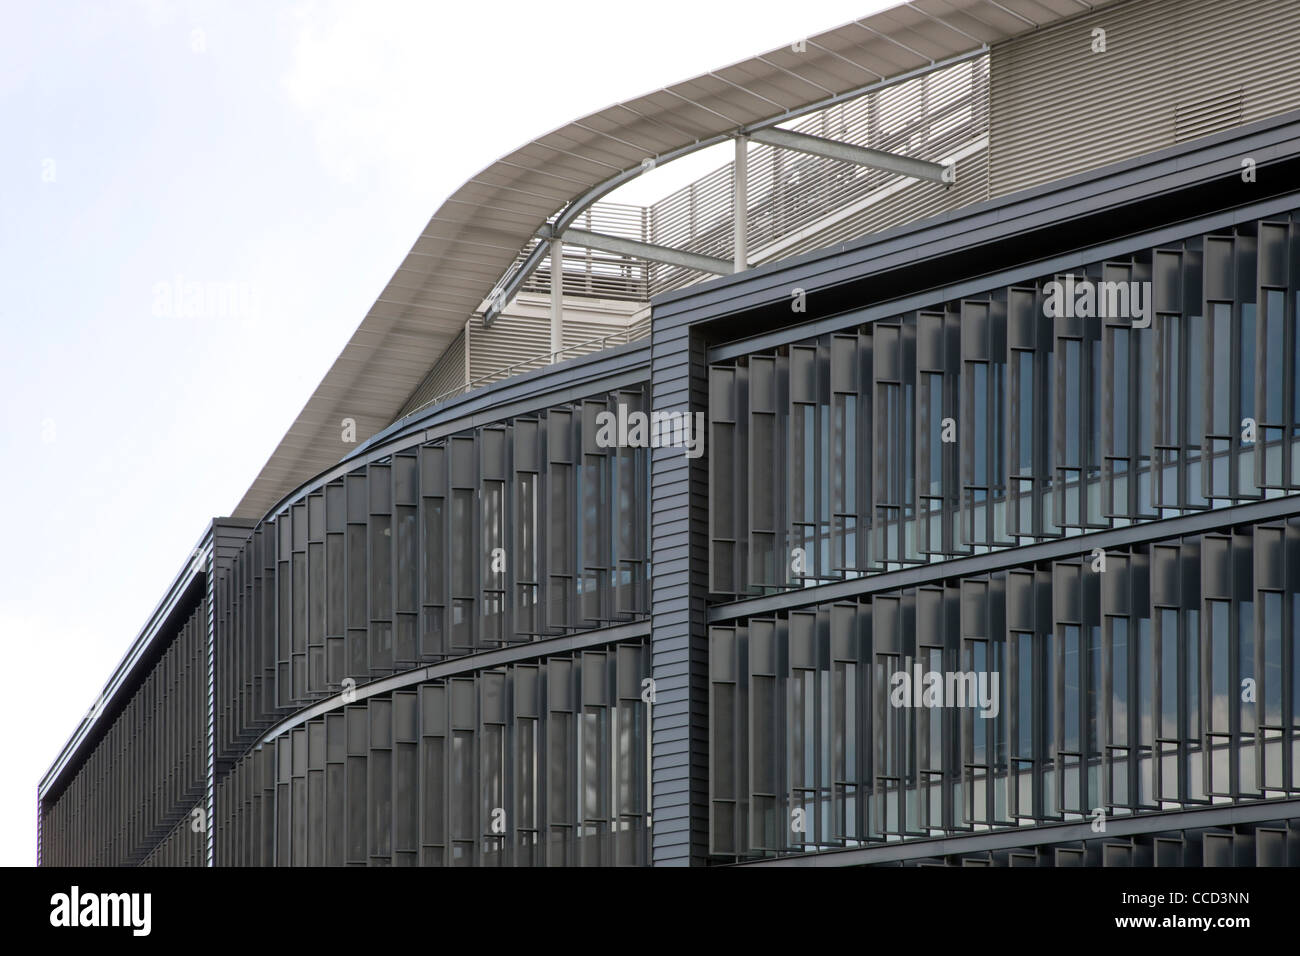 The Li Ka Shing Centre Housing Cancer Research Uk Cambridge Research Institute Was Completed In 2006. Stock Photo